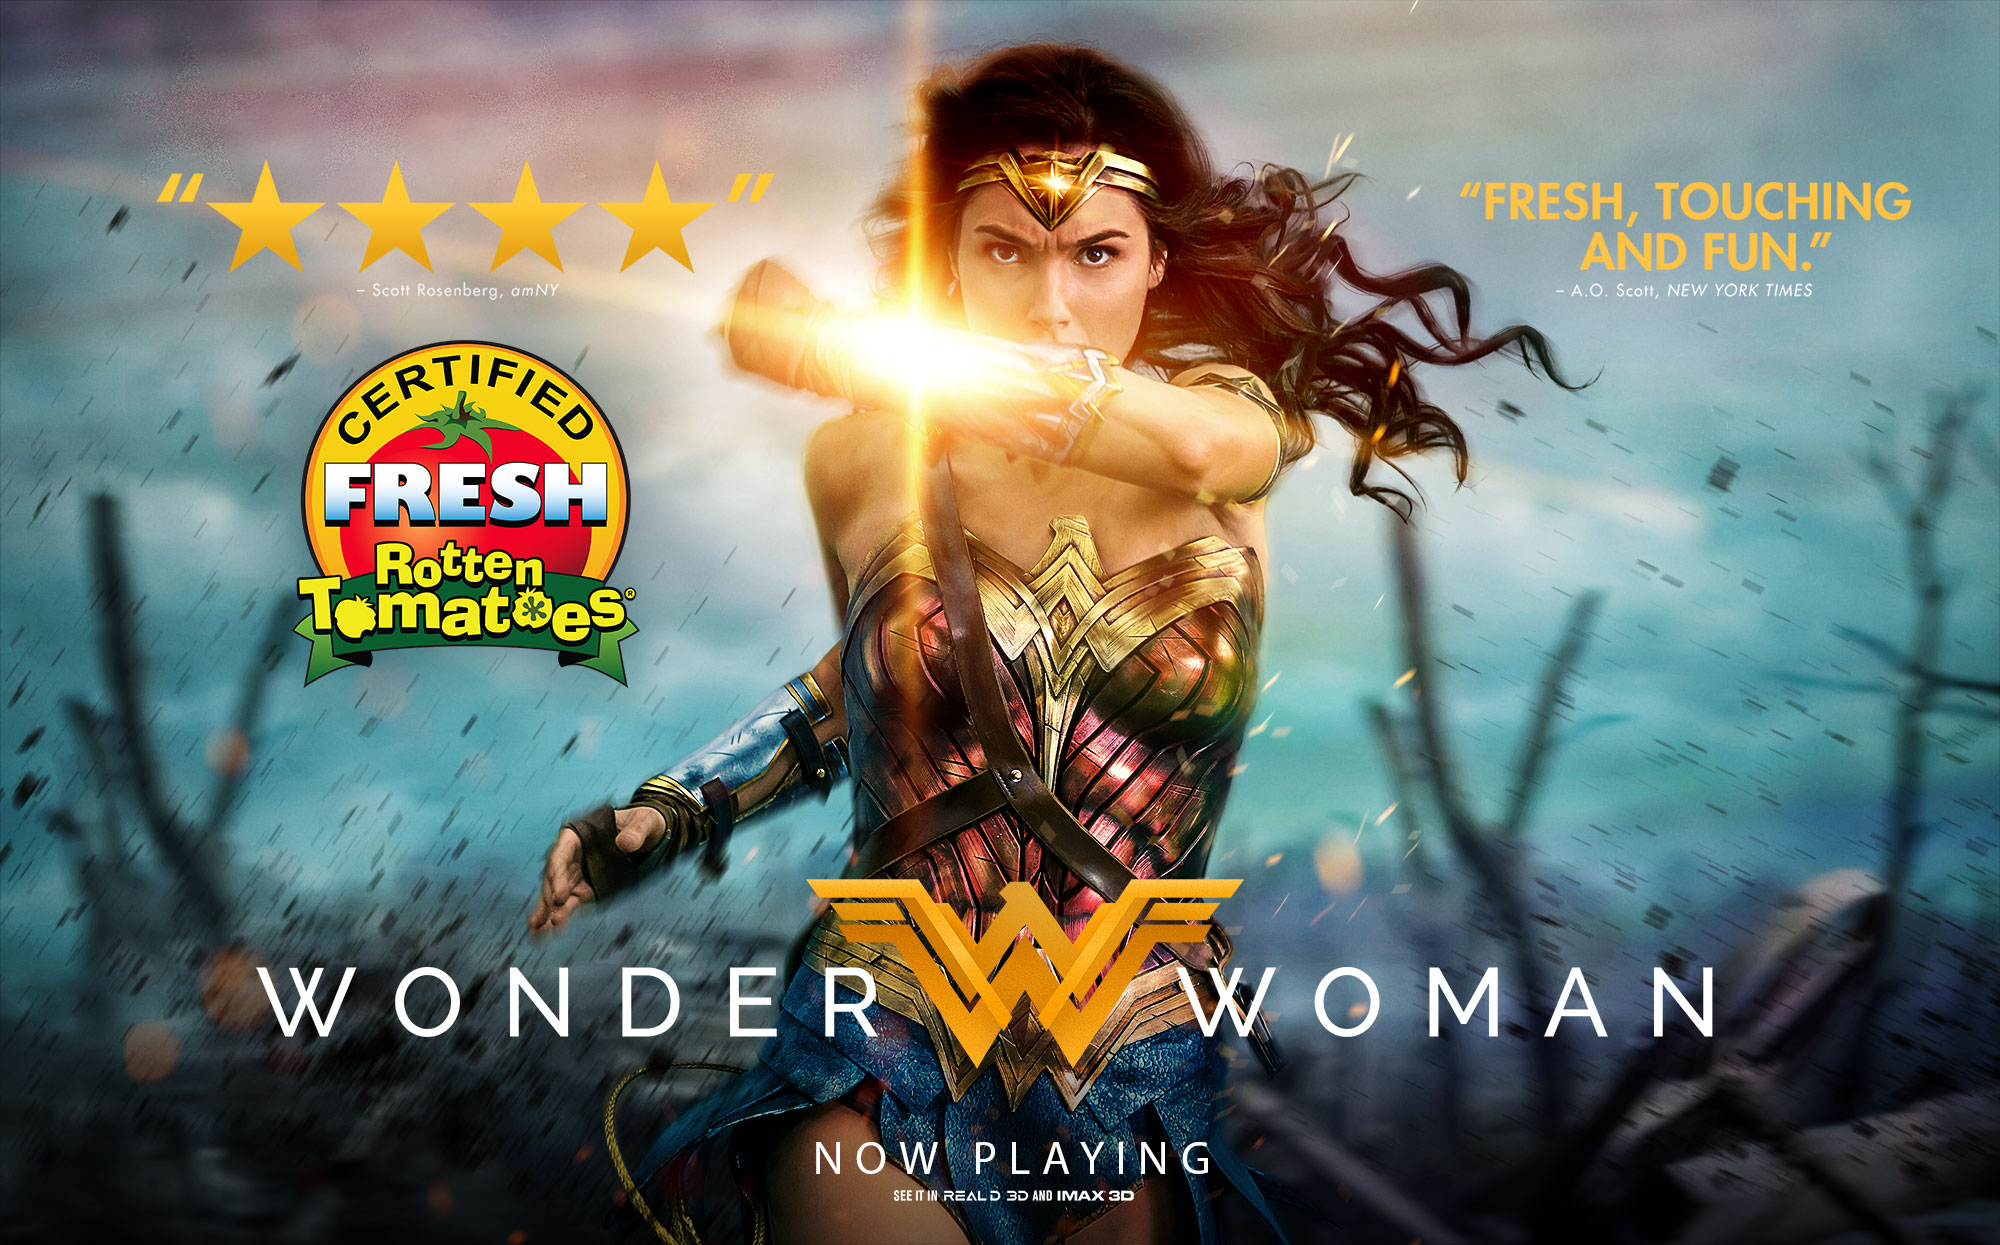 Wonder Woman – The DCEU Strikes Back With Its Best Film Yet!